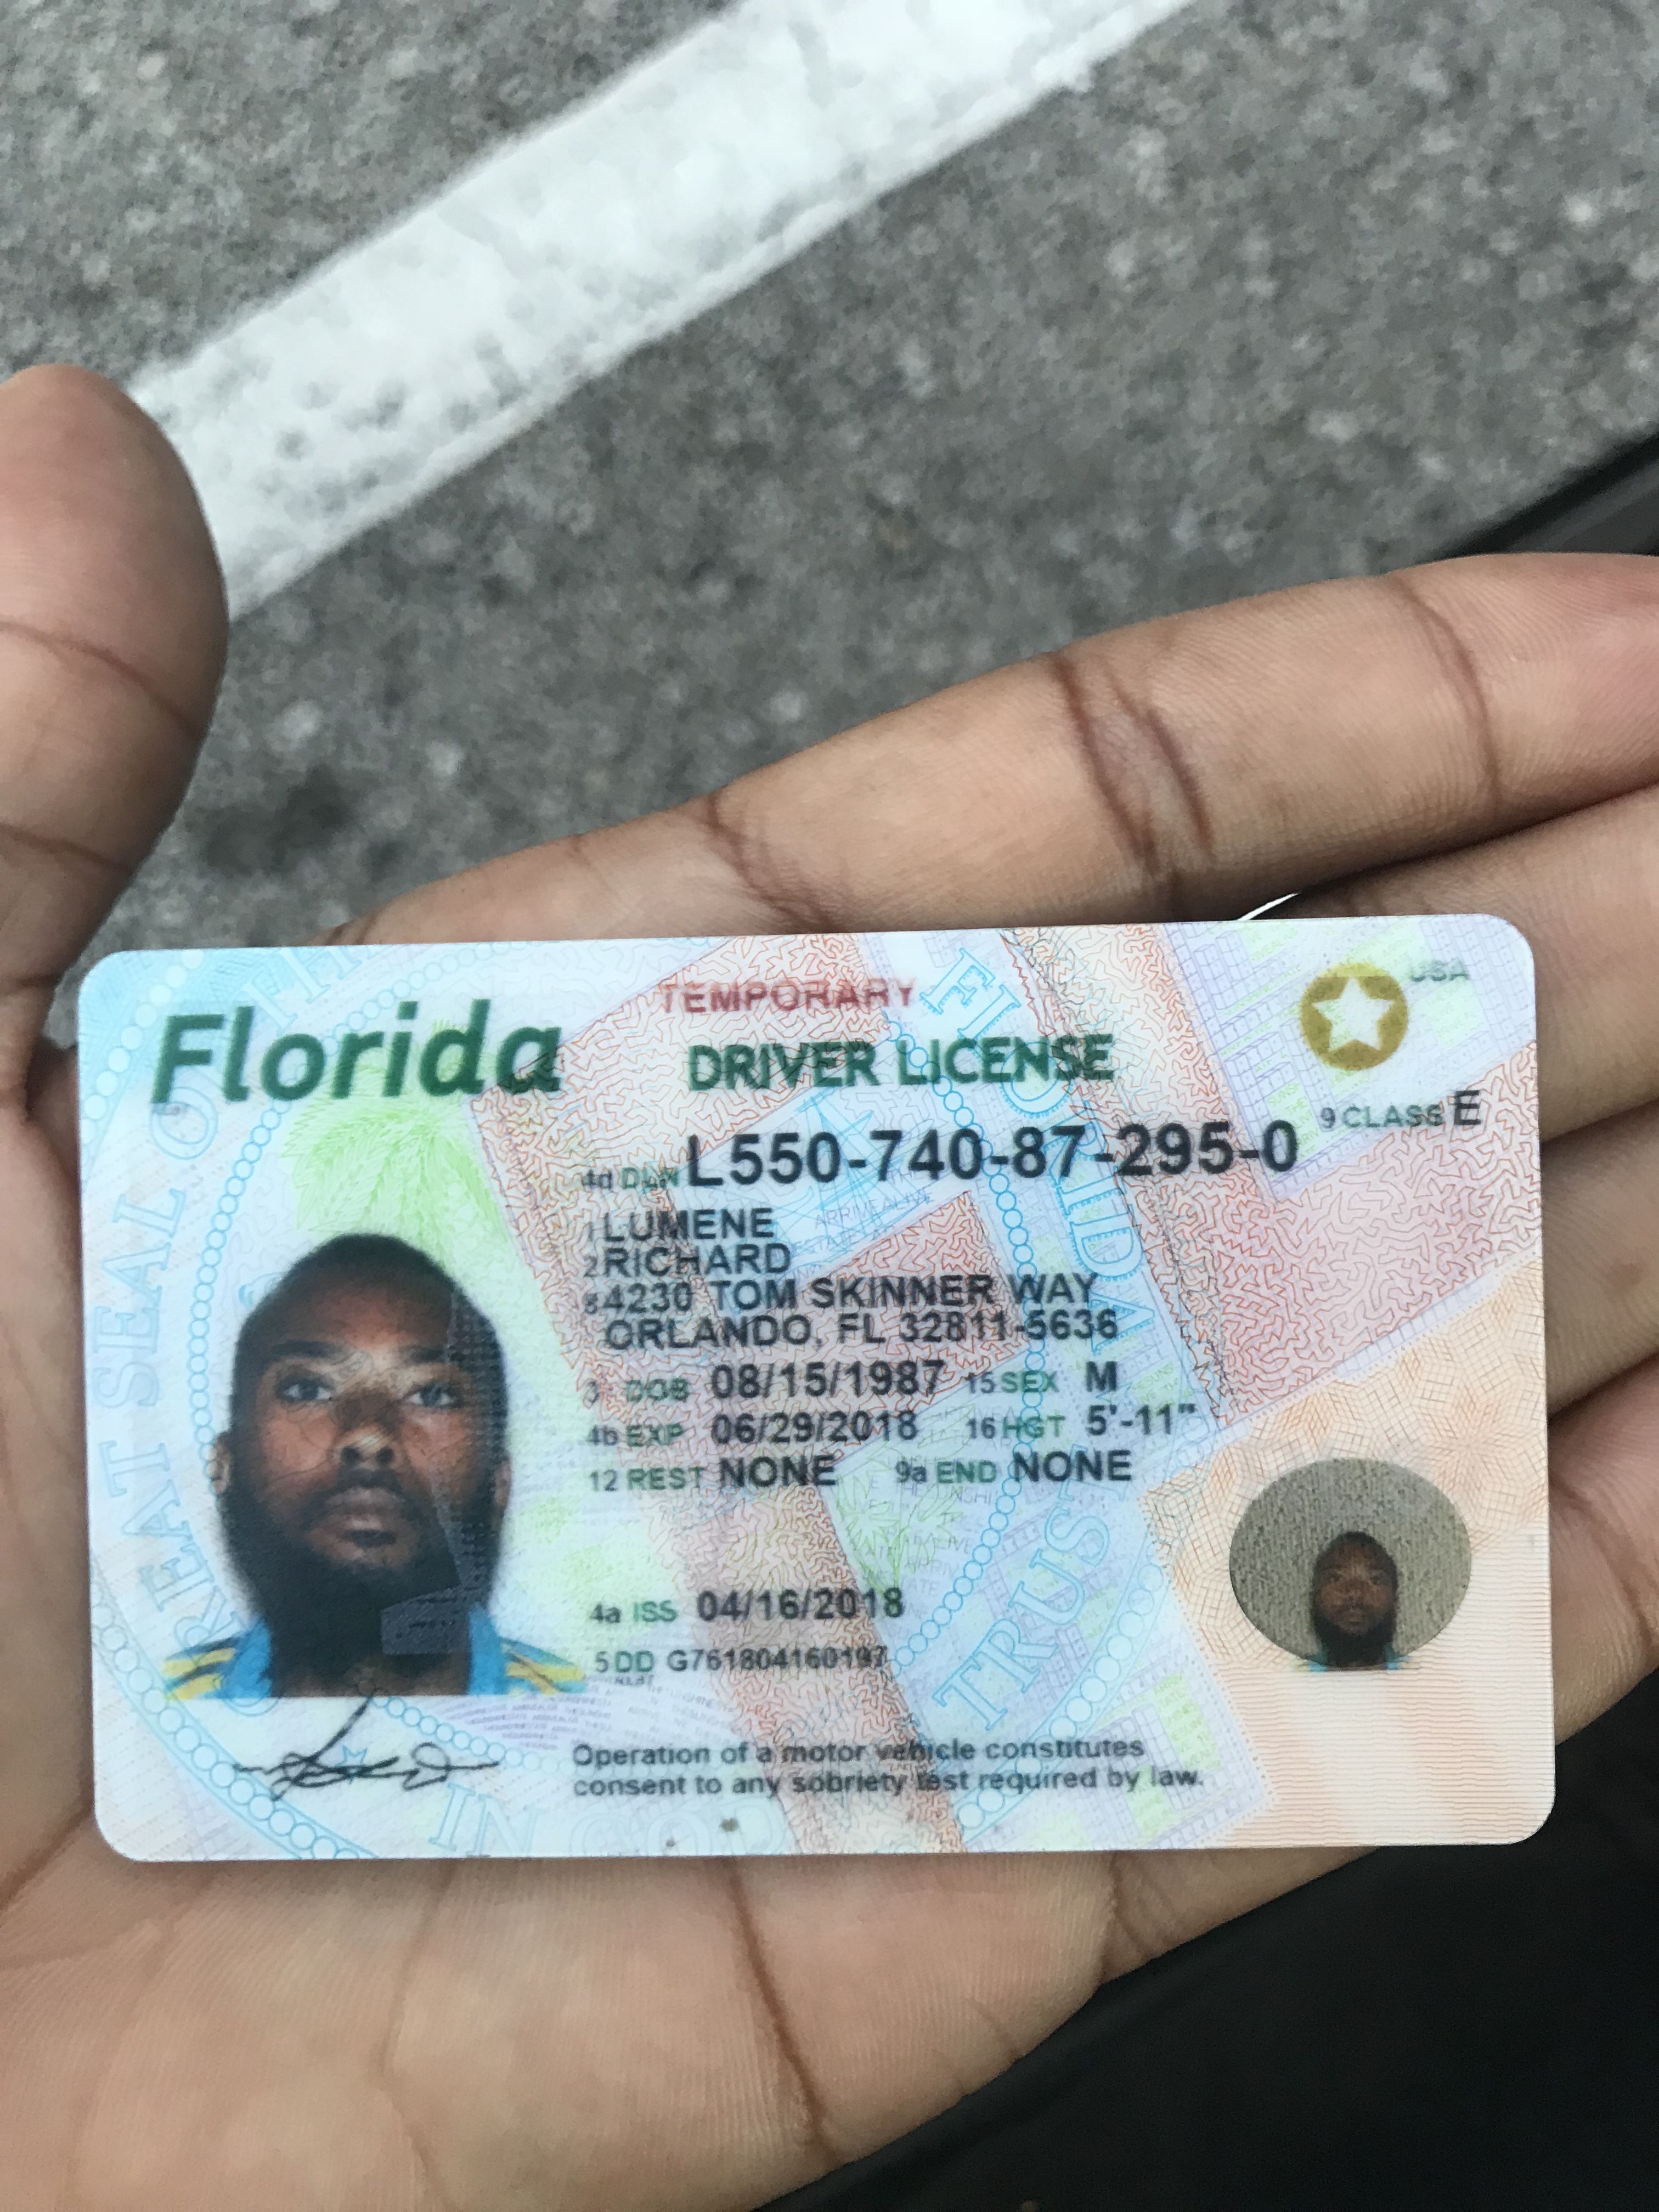 florida drivers license template psd free